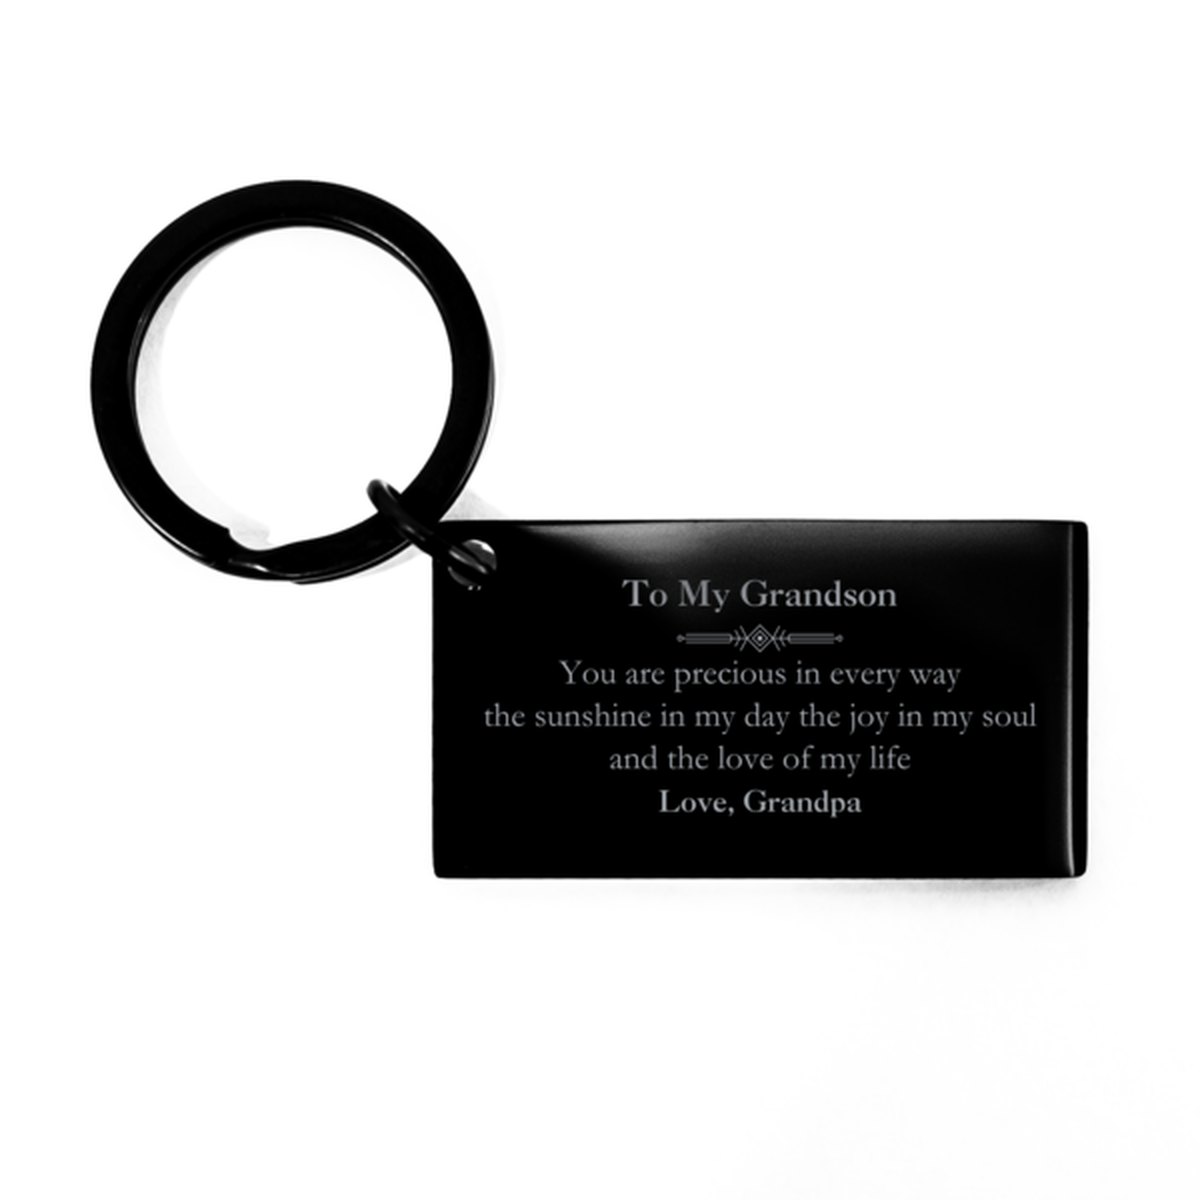 Graduation Gifts for Grandson Keychain Present from Grandpa, Christmas Grandson Birthday Gifts Grandson You are precious in every way the sunshine in my day. Love, Grandpa